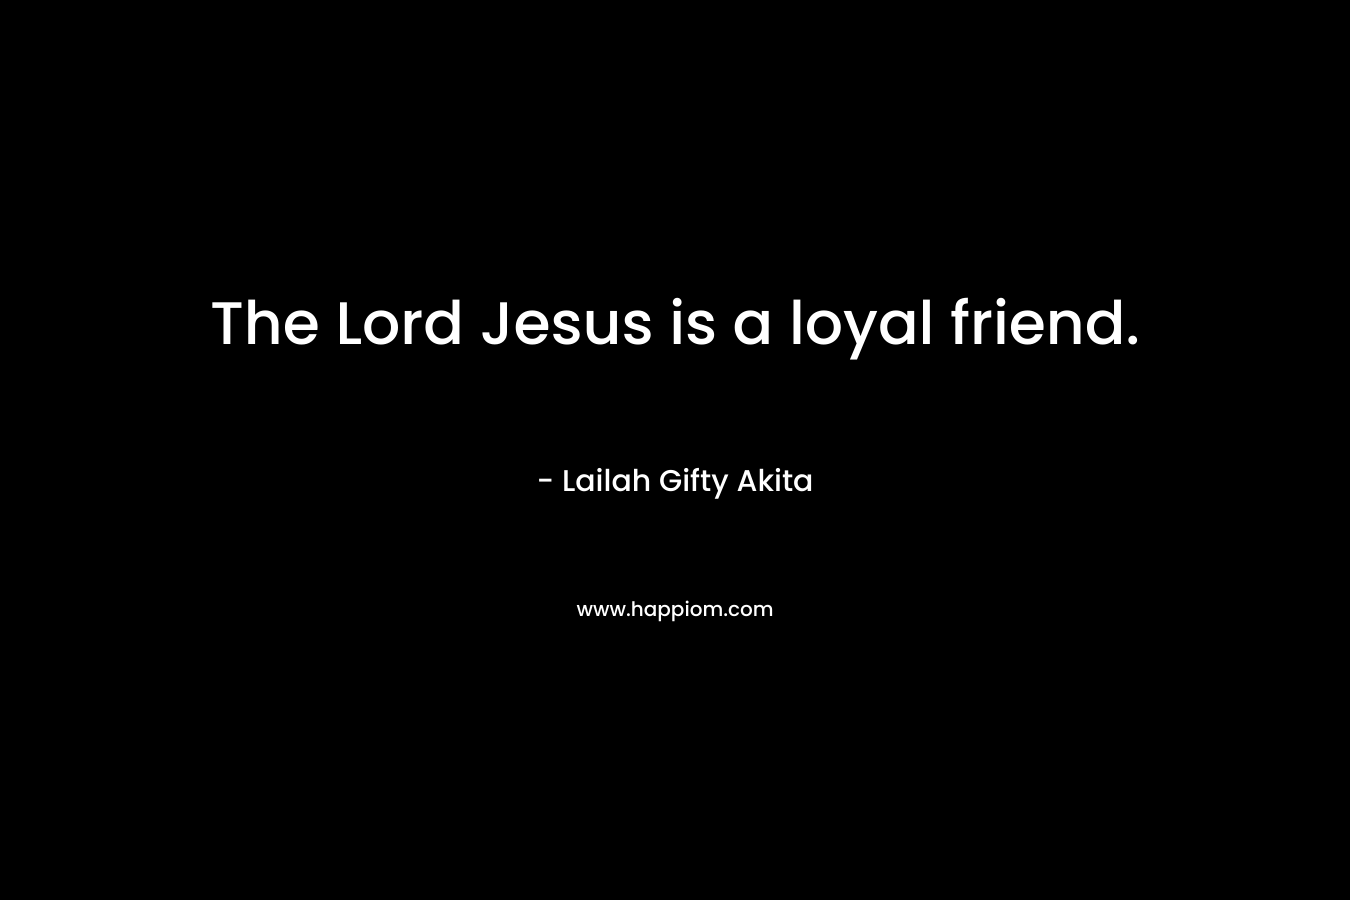 The Lord Jesus is a loyal friend.